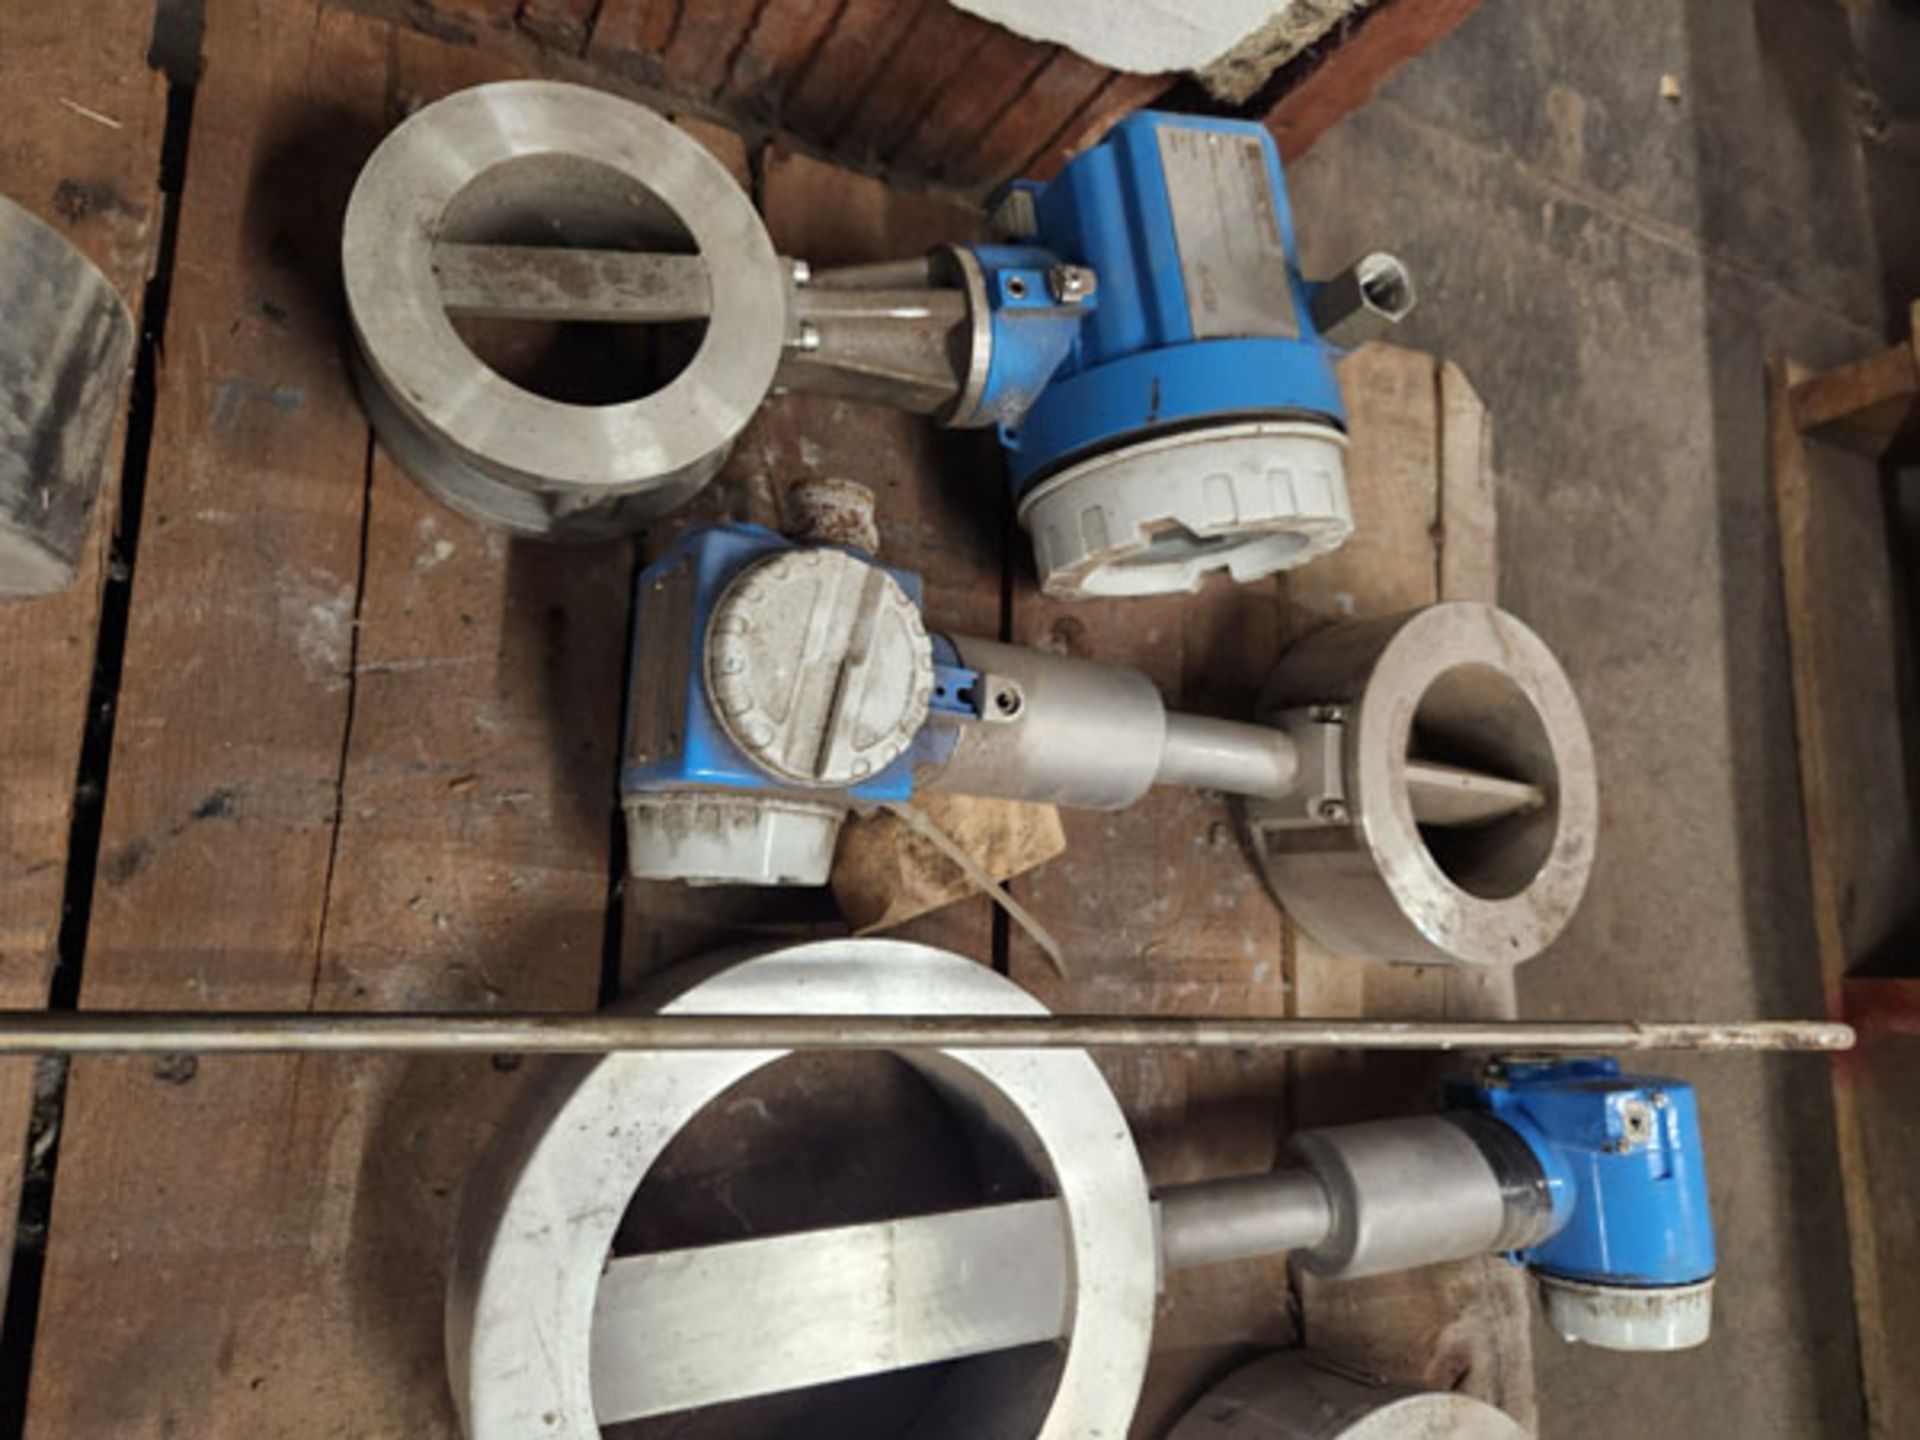 SKID OF VARIOUS ROSEMONT AND ENDRESS-HAUSER FLOWMETERS, FITTINGS, AND TRANSMITTERS - Image 10 of 10